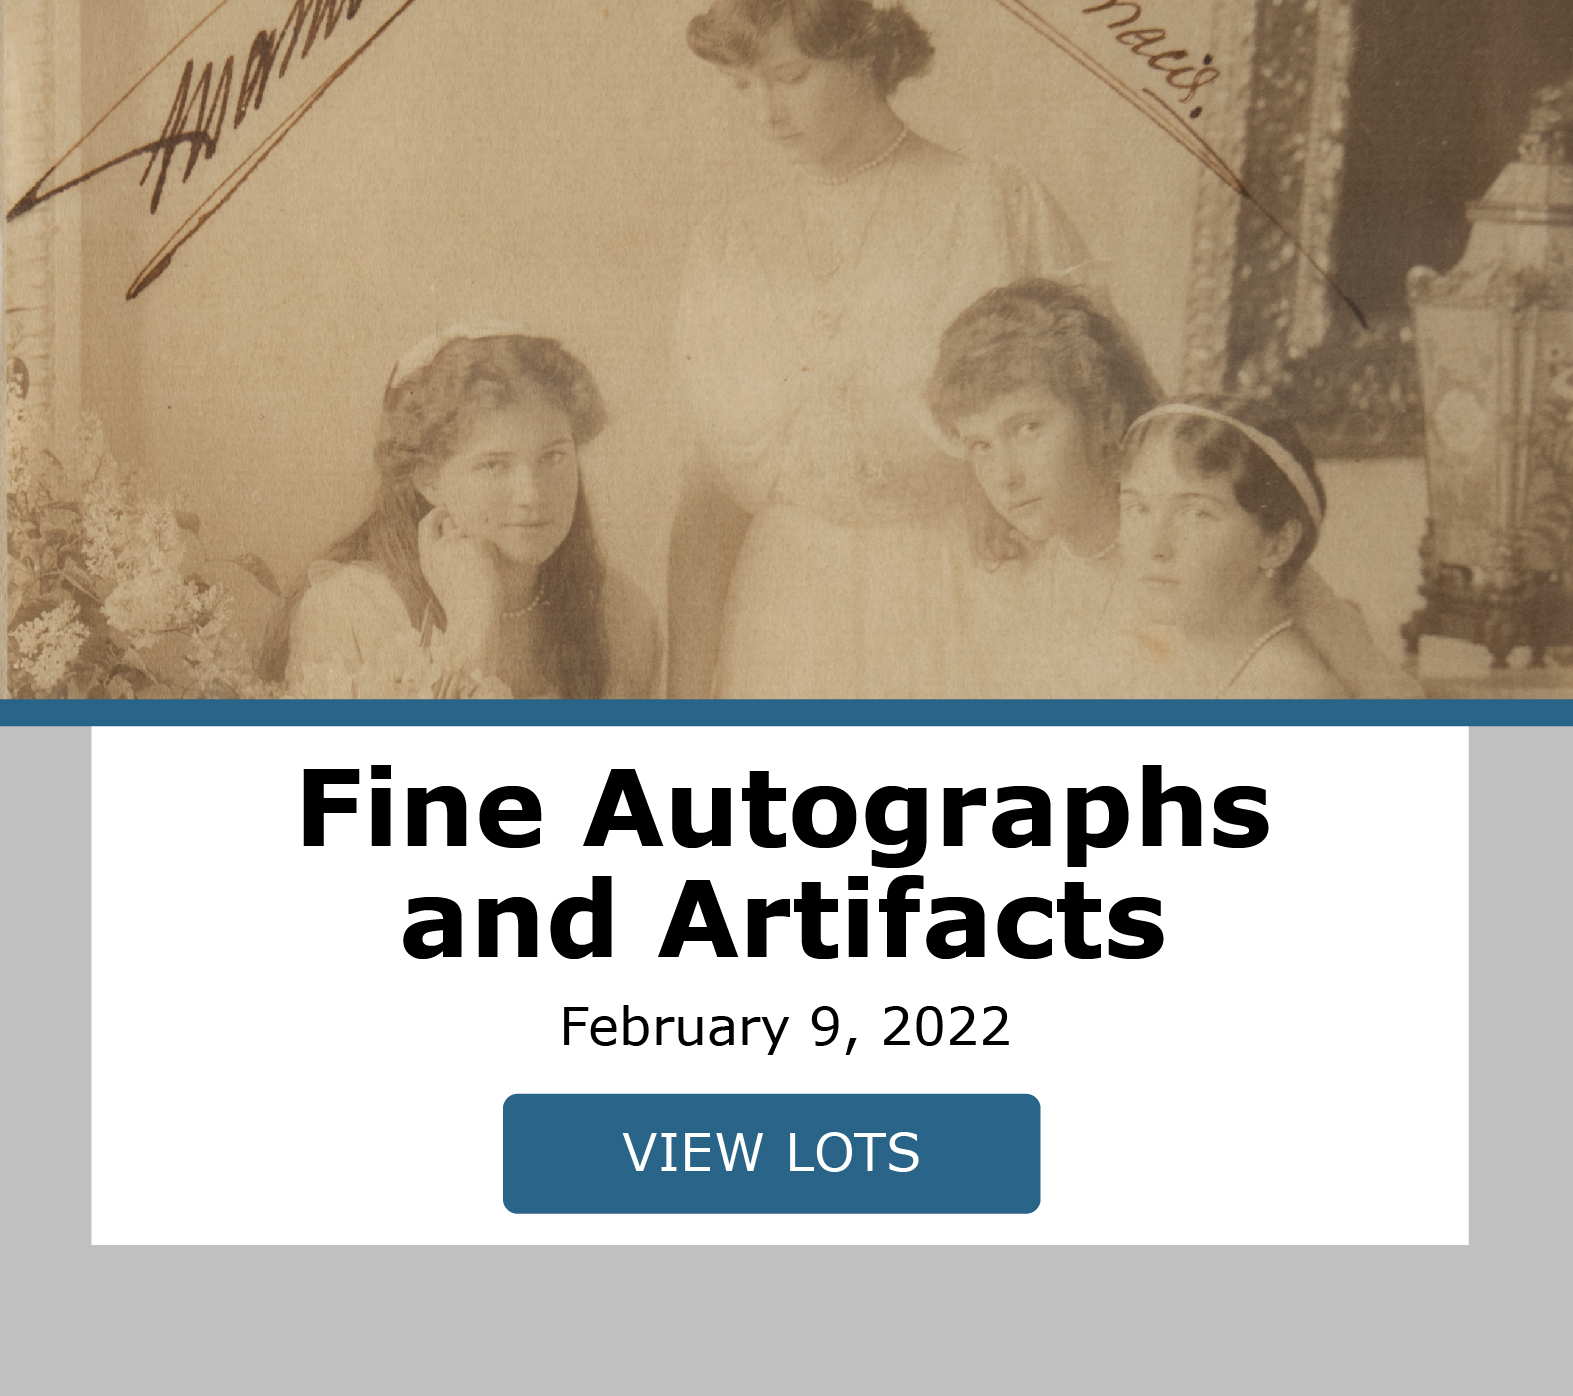 Fine Autographs and Artifacts